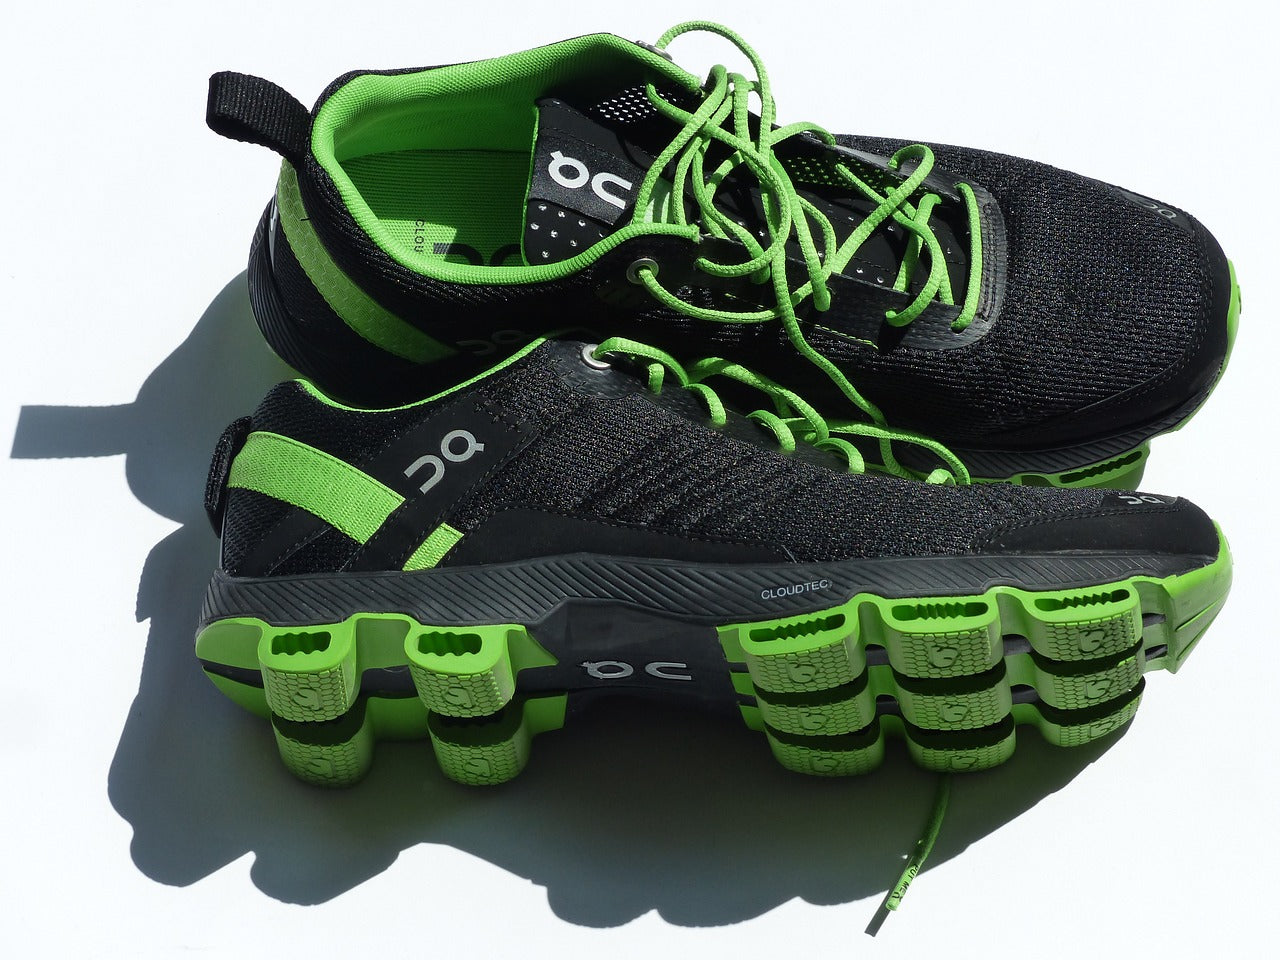 Running On Clouds: All You Need To Know About On Running Shoes